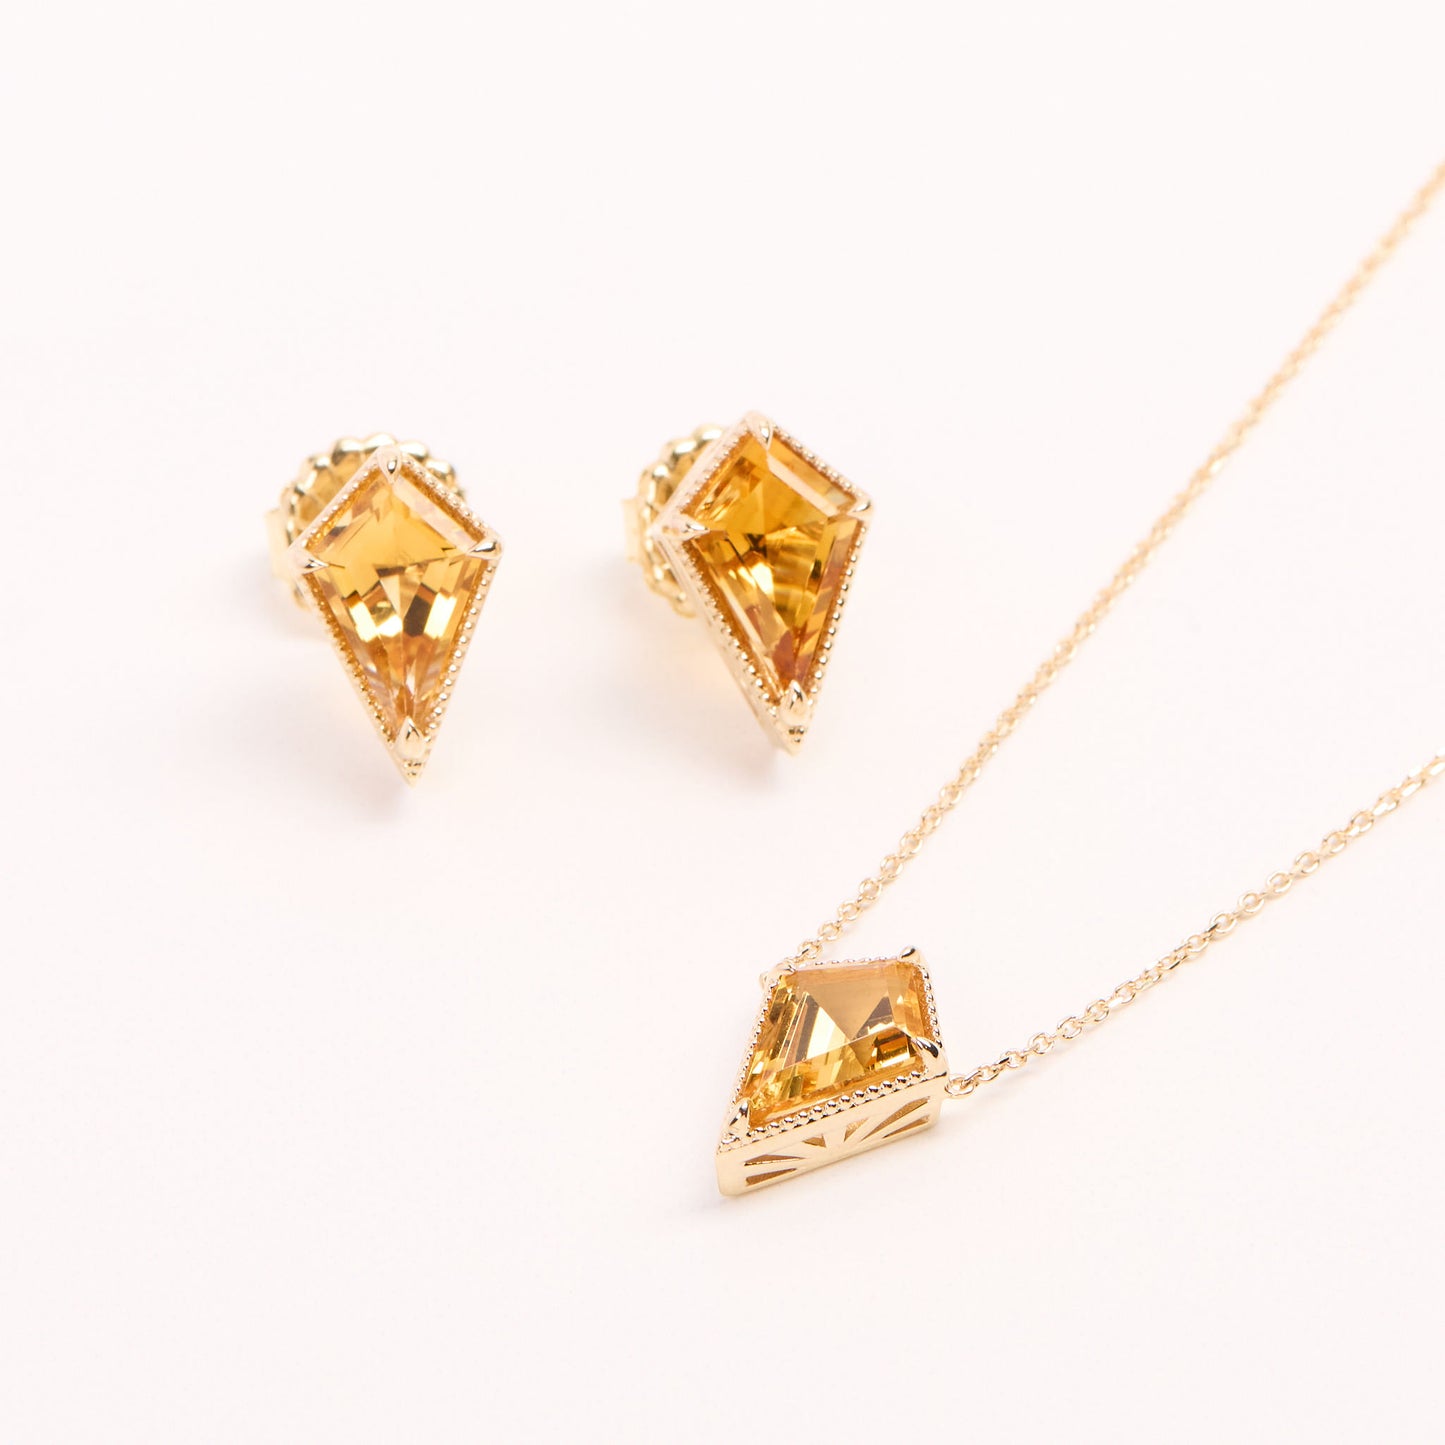 angled view of the soleil necklace and stud earrings on a white background